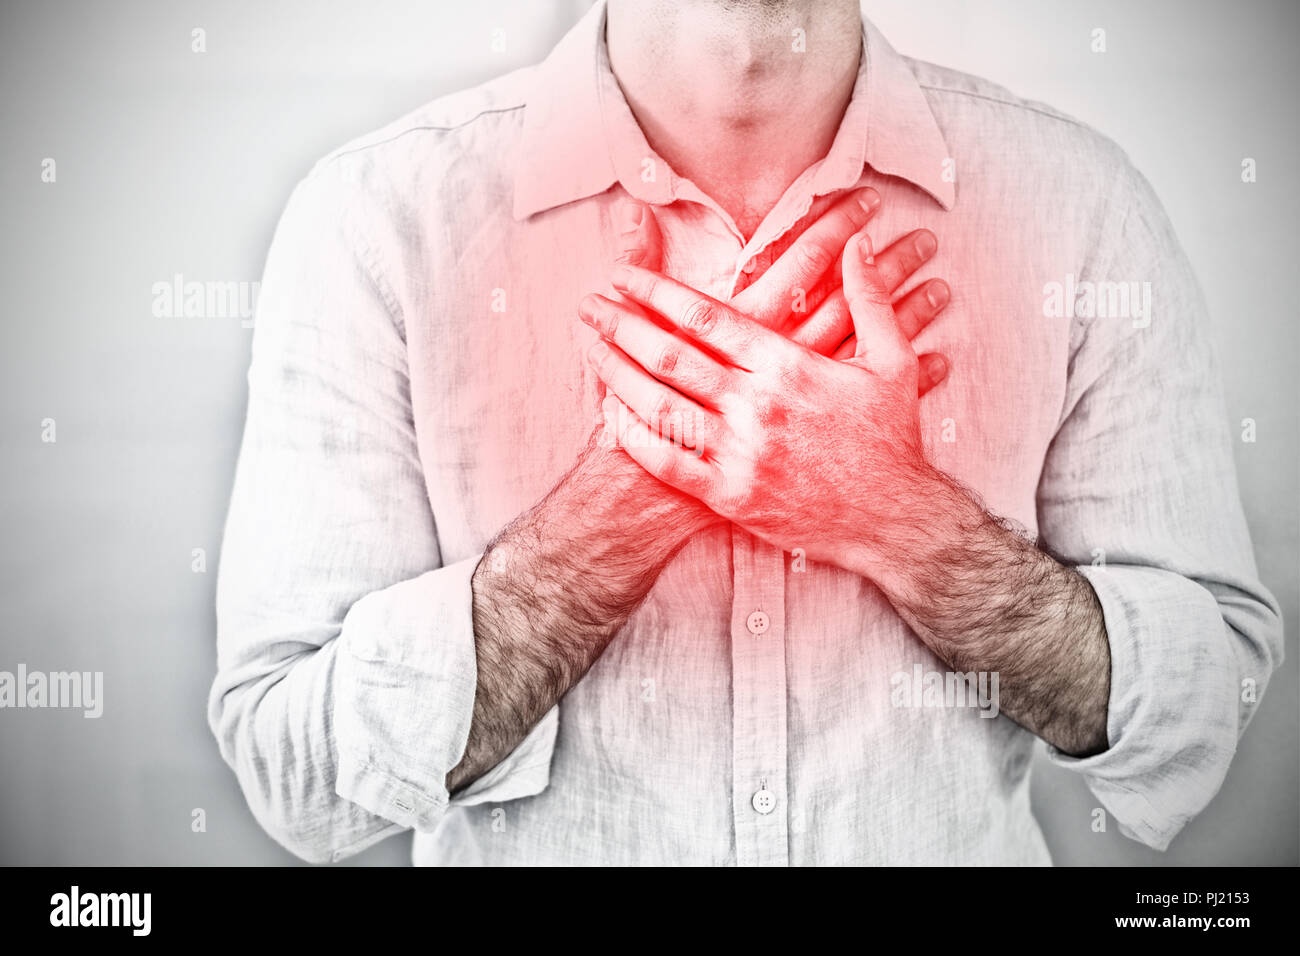 Composite image of mid section of a man with chest pain Stock Photo